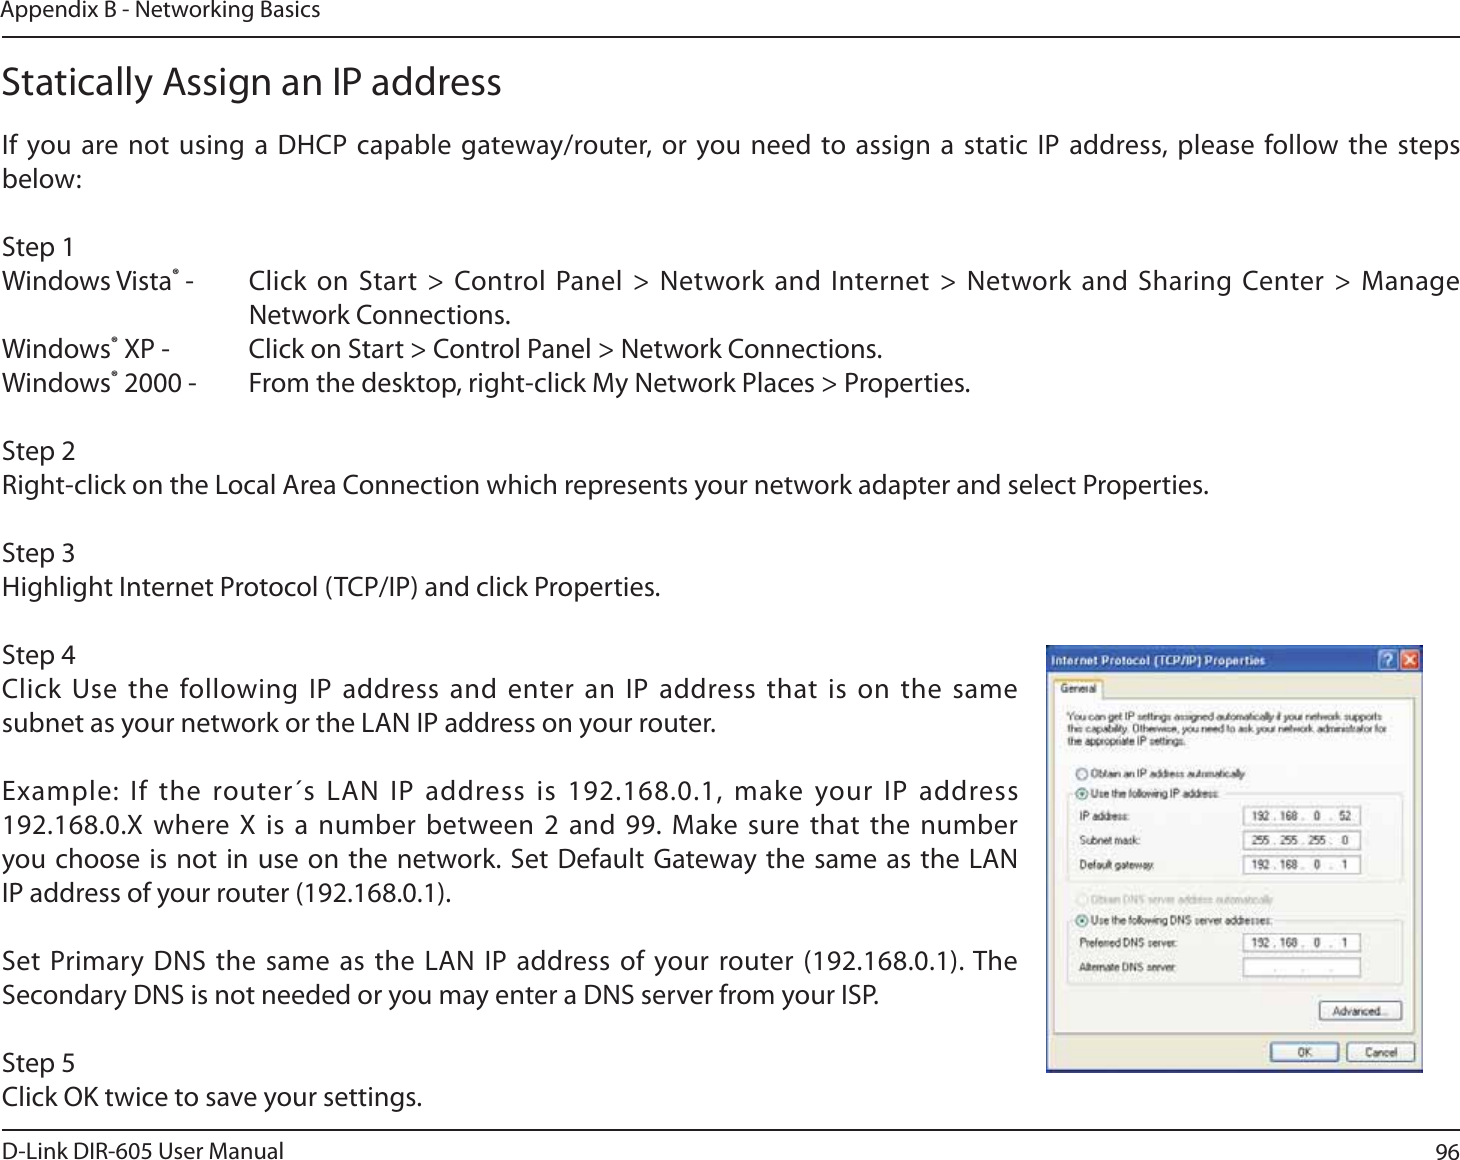 96D-Link DIR-605 User ManualAppendix B - Networking BasicsStatically Assign an IP addressIf you are not using a DHCP capable gateway/router, or you need to assign a static IP address, please follow the steps below:Step 1Windows Vista® - Click on Start &gt; Control Panel &gt; Network and Internet &gt; Network and Sharing Center &gt; Manage Network Connections.Windows® XP - Click on Start &gt; Control Panel &gt; Network Connections.Windows® 2000 - From the desktop, right-click My Network Places &gt; Properties.Step 2Right-click on the Local Area Connection which represents your network adapter and select Properties.Step 3Highlight Internet Protocol (TCP/IP) and click Properties.Step 4Click Use the following IP address and enter an IP address that is on the same subnet as your network or the LAN IP address on your router. Example: If the router´s LAN IP address is 192.168.0.1, make your IP address 192.168.0.X where X is a number between 2 and 99. Make sure that the number you choose is not in use on the network. Set Default Gateway the same as the LAN IP address of your router (192.168.0.1). Set Primary DNS the same as the LAN IP address of your router (192.168.0.1). The Secondary DNS is not needed or you may enter a DNS server from your ISP.Step 5Click OK twice to save your settings.